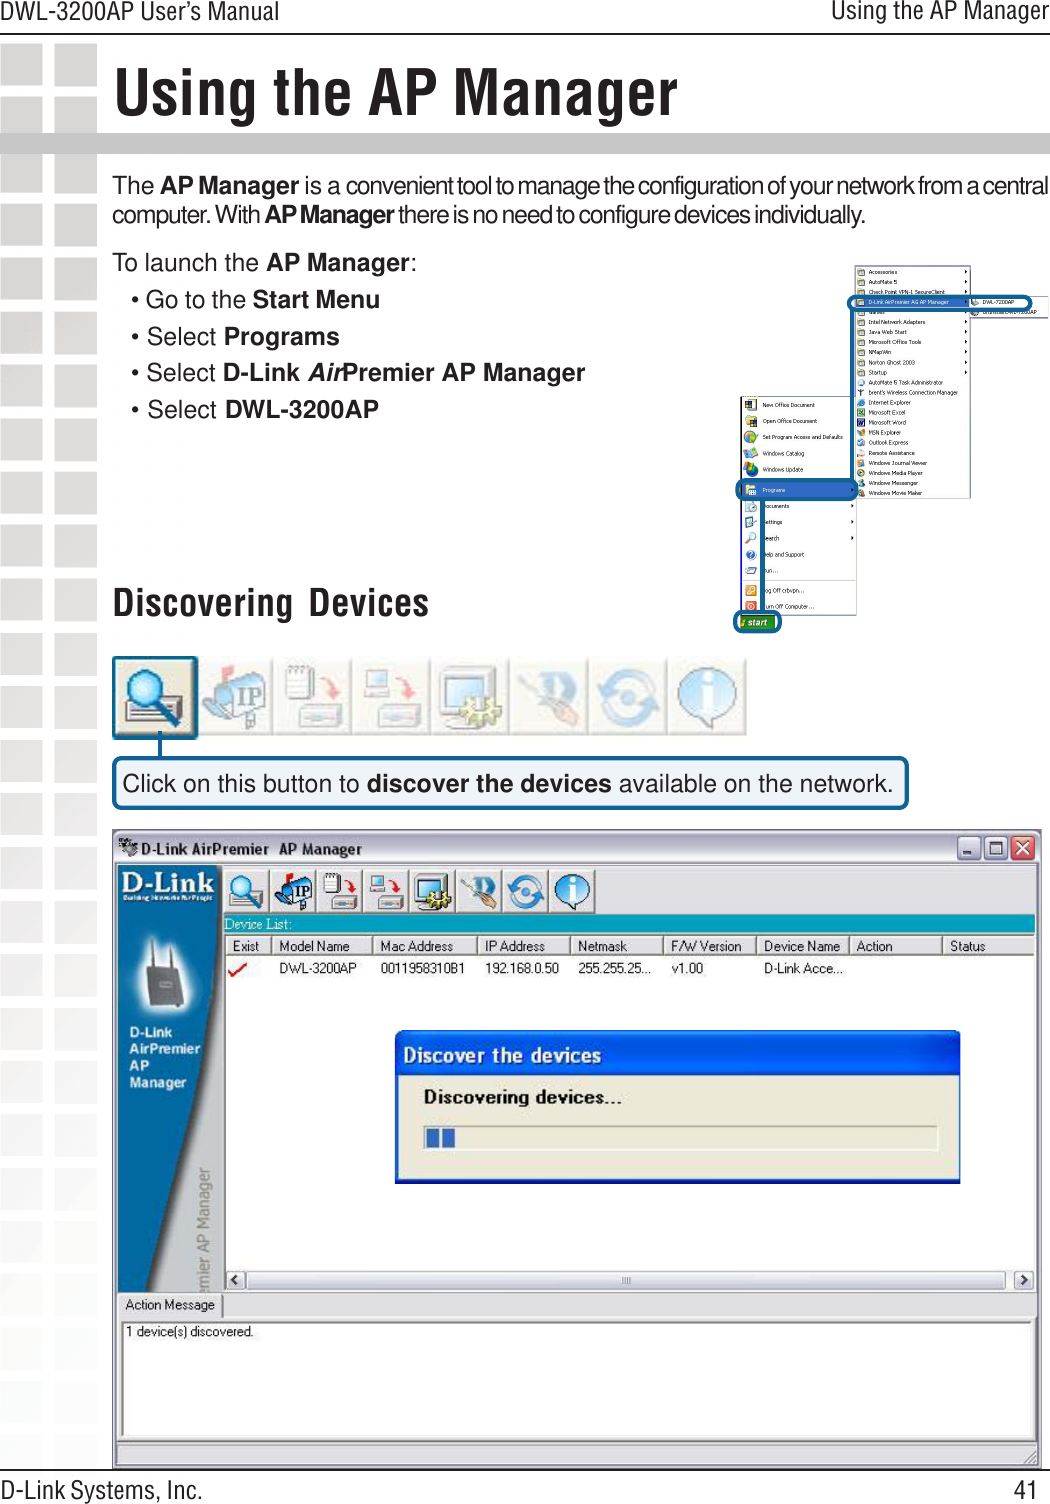 41DWL-3200AP User’s ManualD-Link Systems, Inc.Using the AP ManagerUsing the AP ManagerThe AP Manager is a convenient tool to manage the configuration of your network from a centralcomputer. With AP Manager there is no need to configure devices individually.To launch the AP Manager:• Go to the Start Menu• Select Programs• Select D-Link AirPremier AP Manager• Select DWL-3200APClick on this button to discover the devices available on the network.Discovering Devices